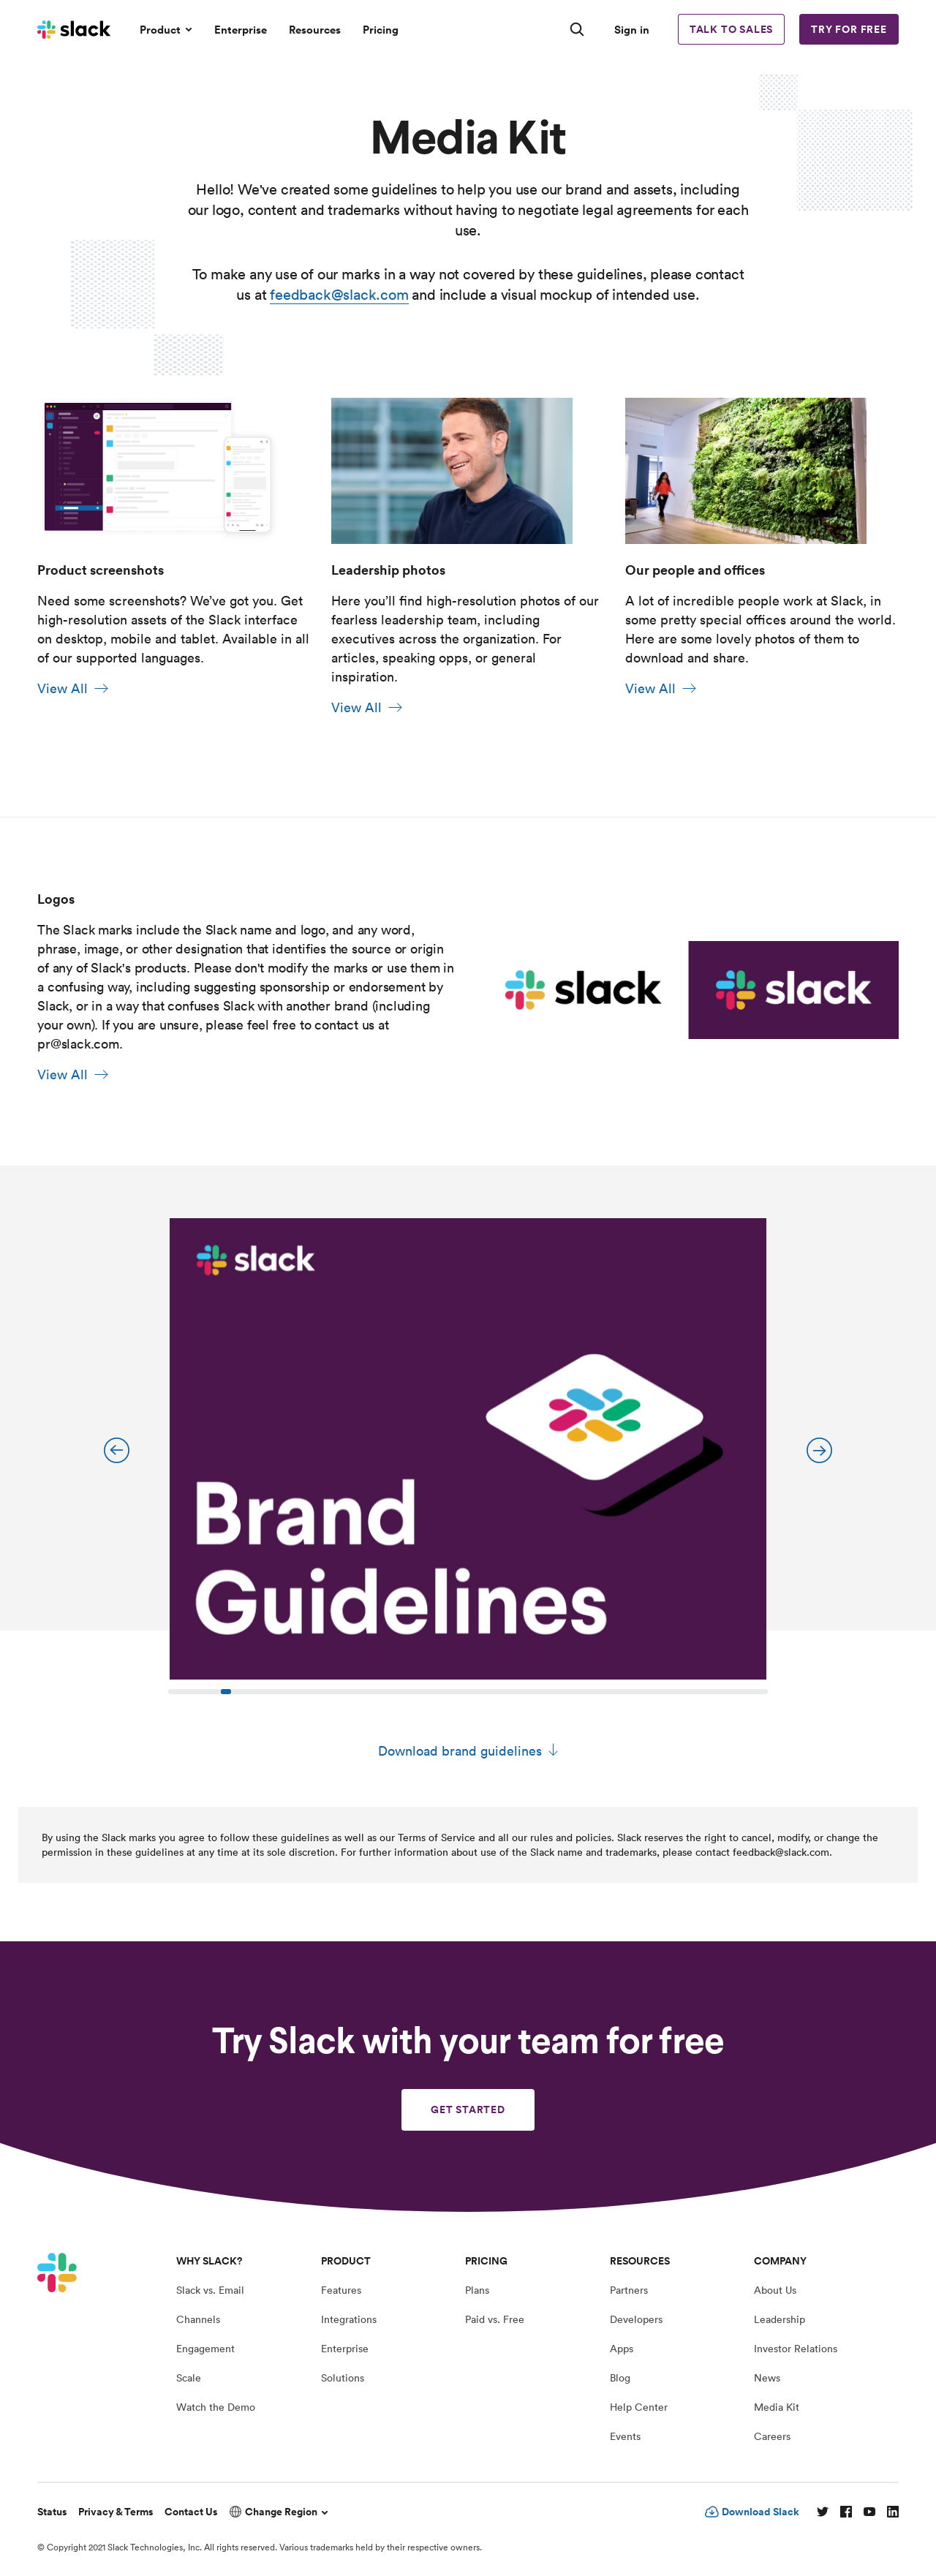 Include brand guidelines